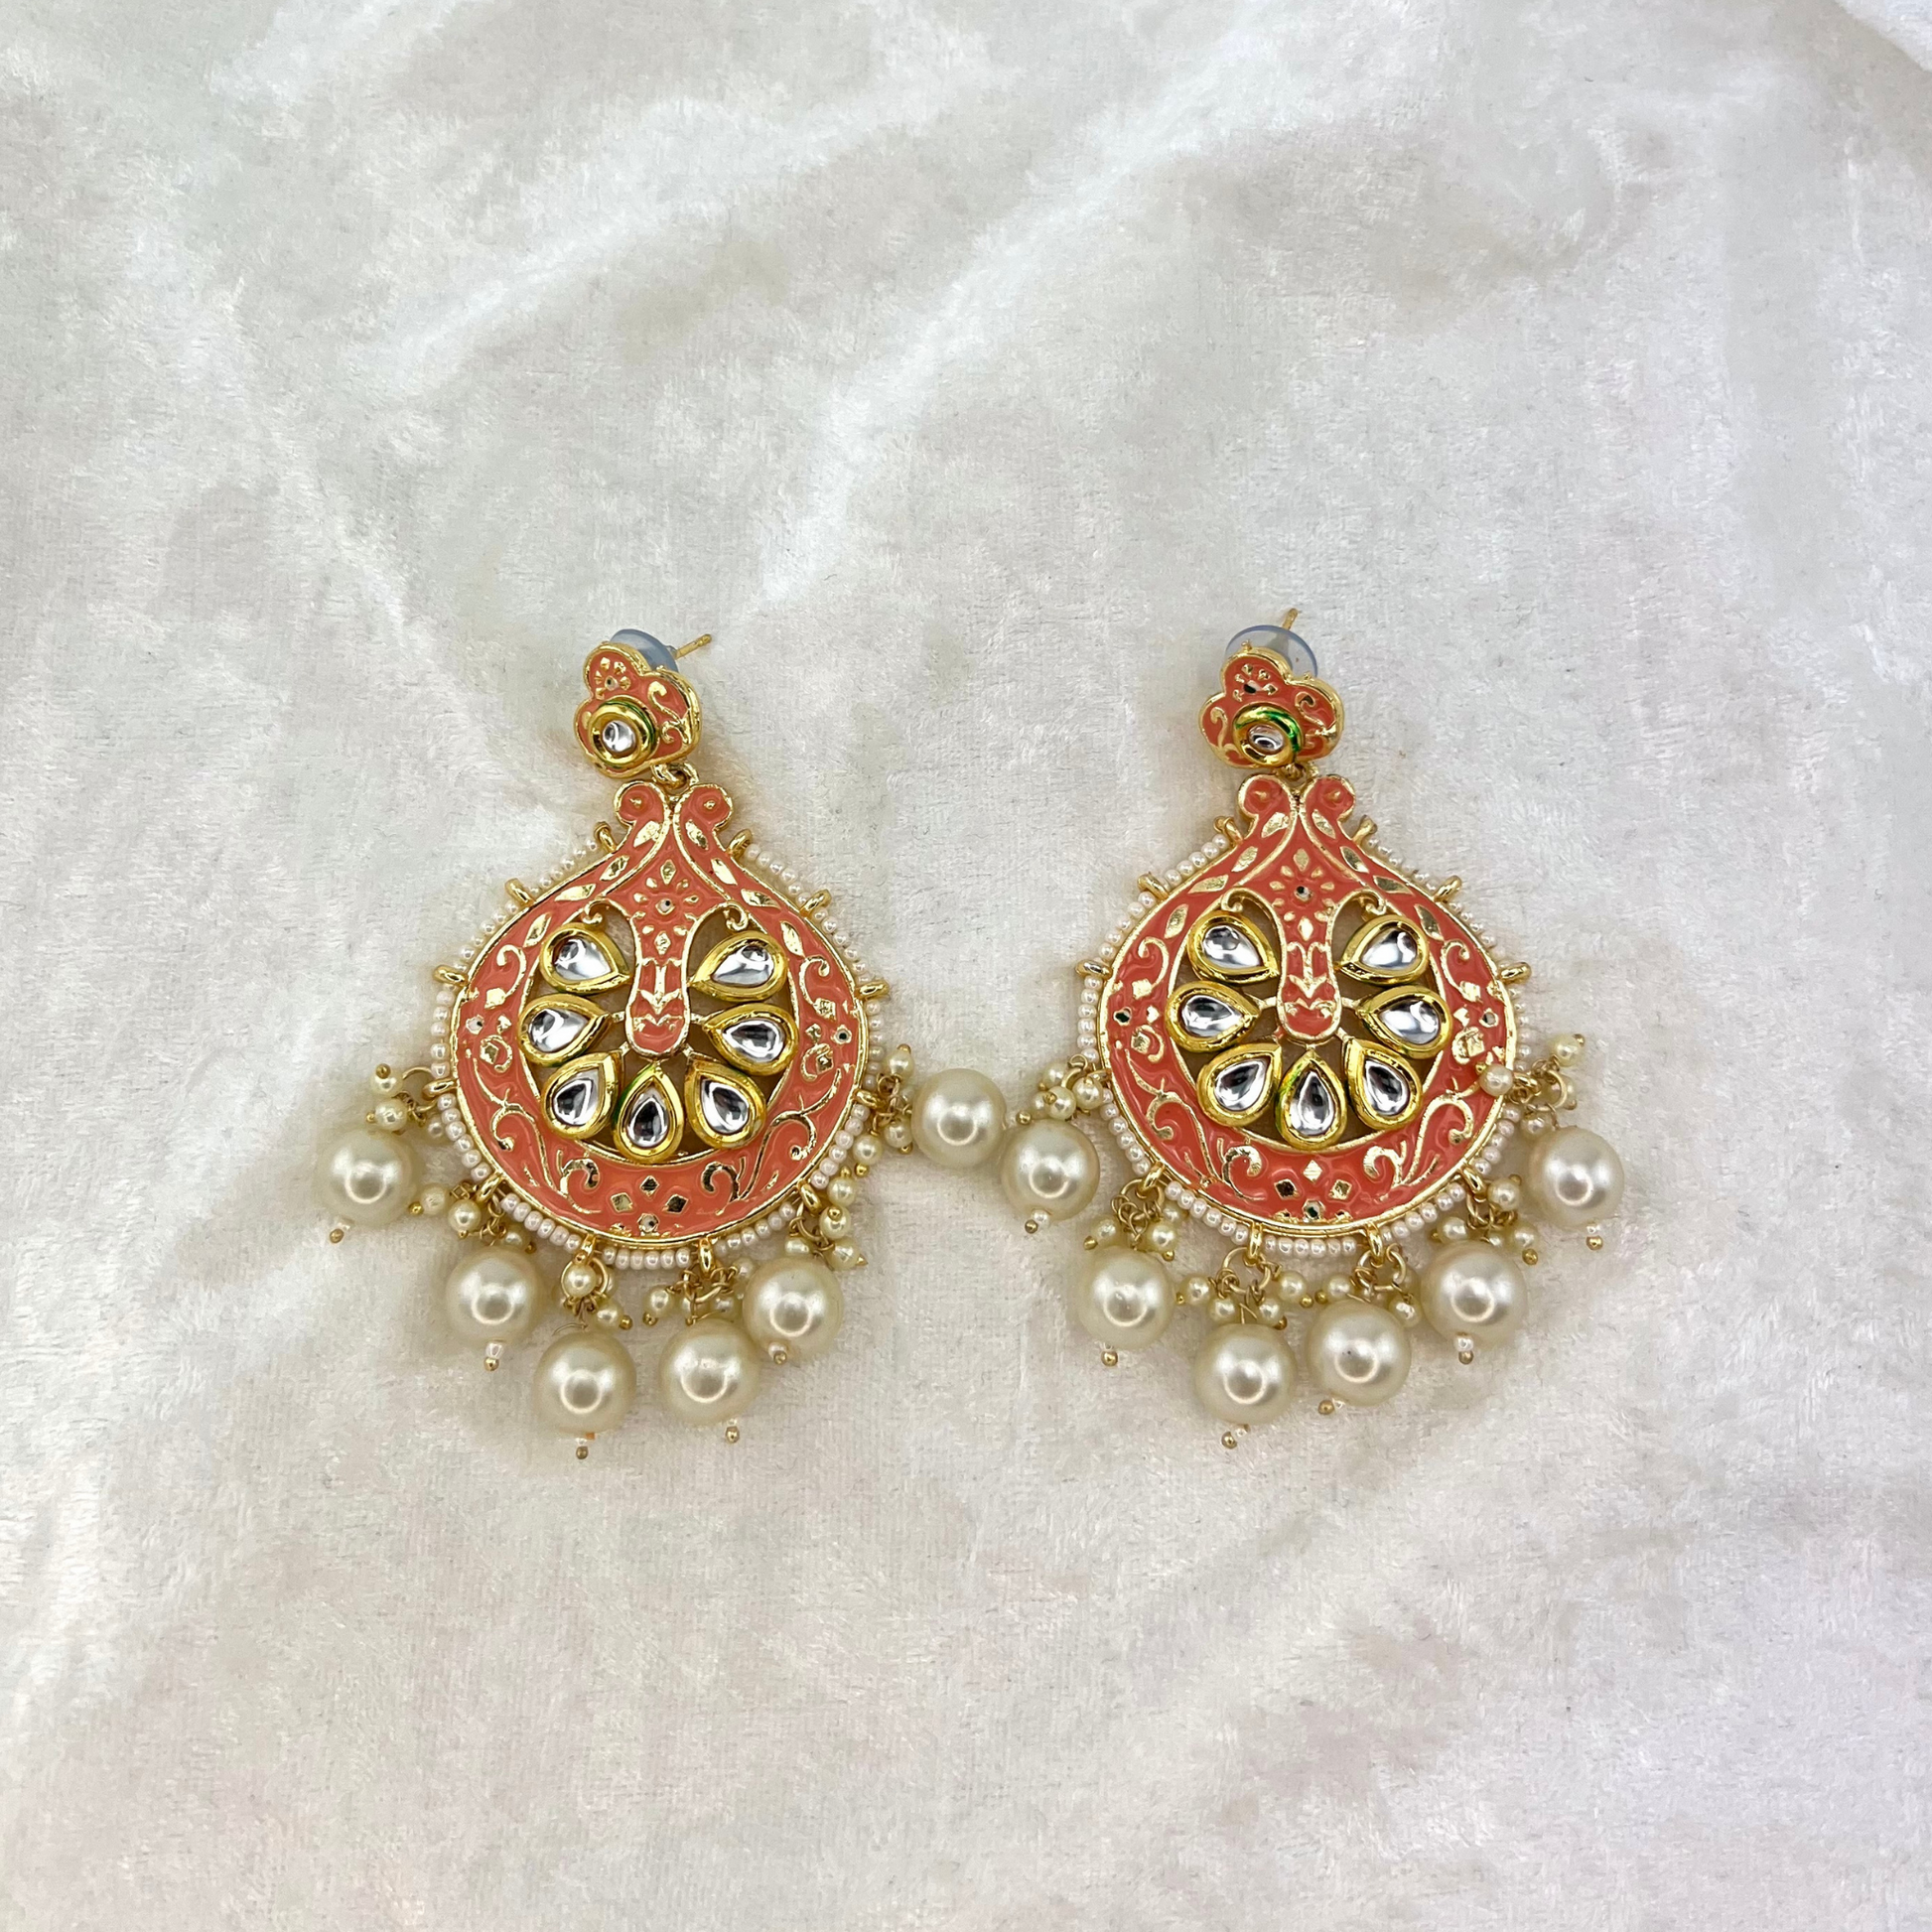 Indian fashion earring, hand painted pearls in Peach colour. Indian wedding jewellery